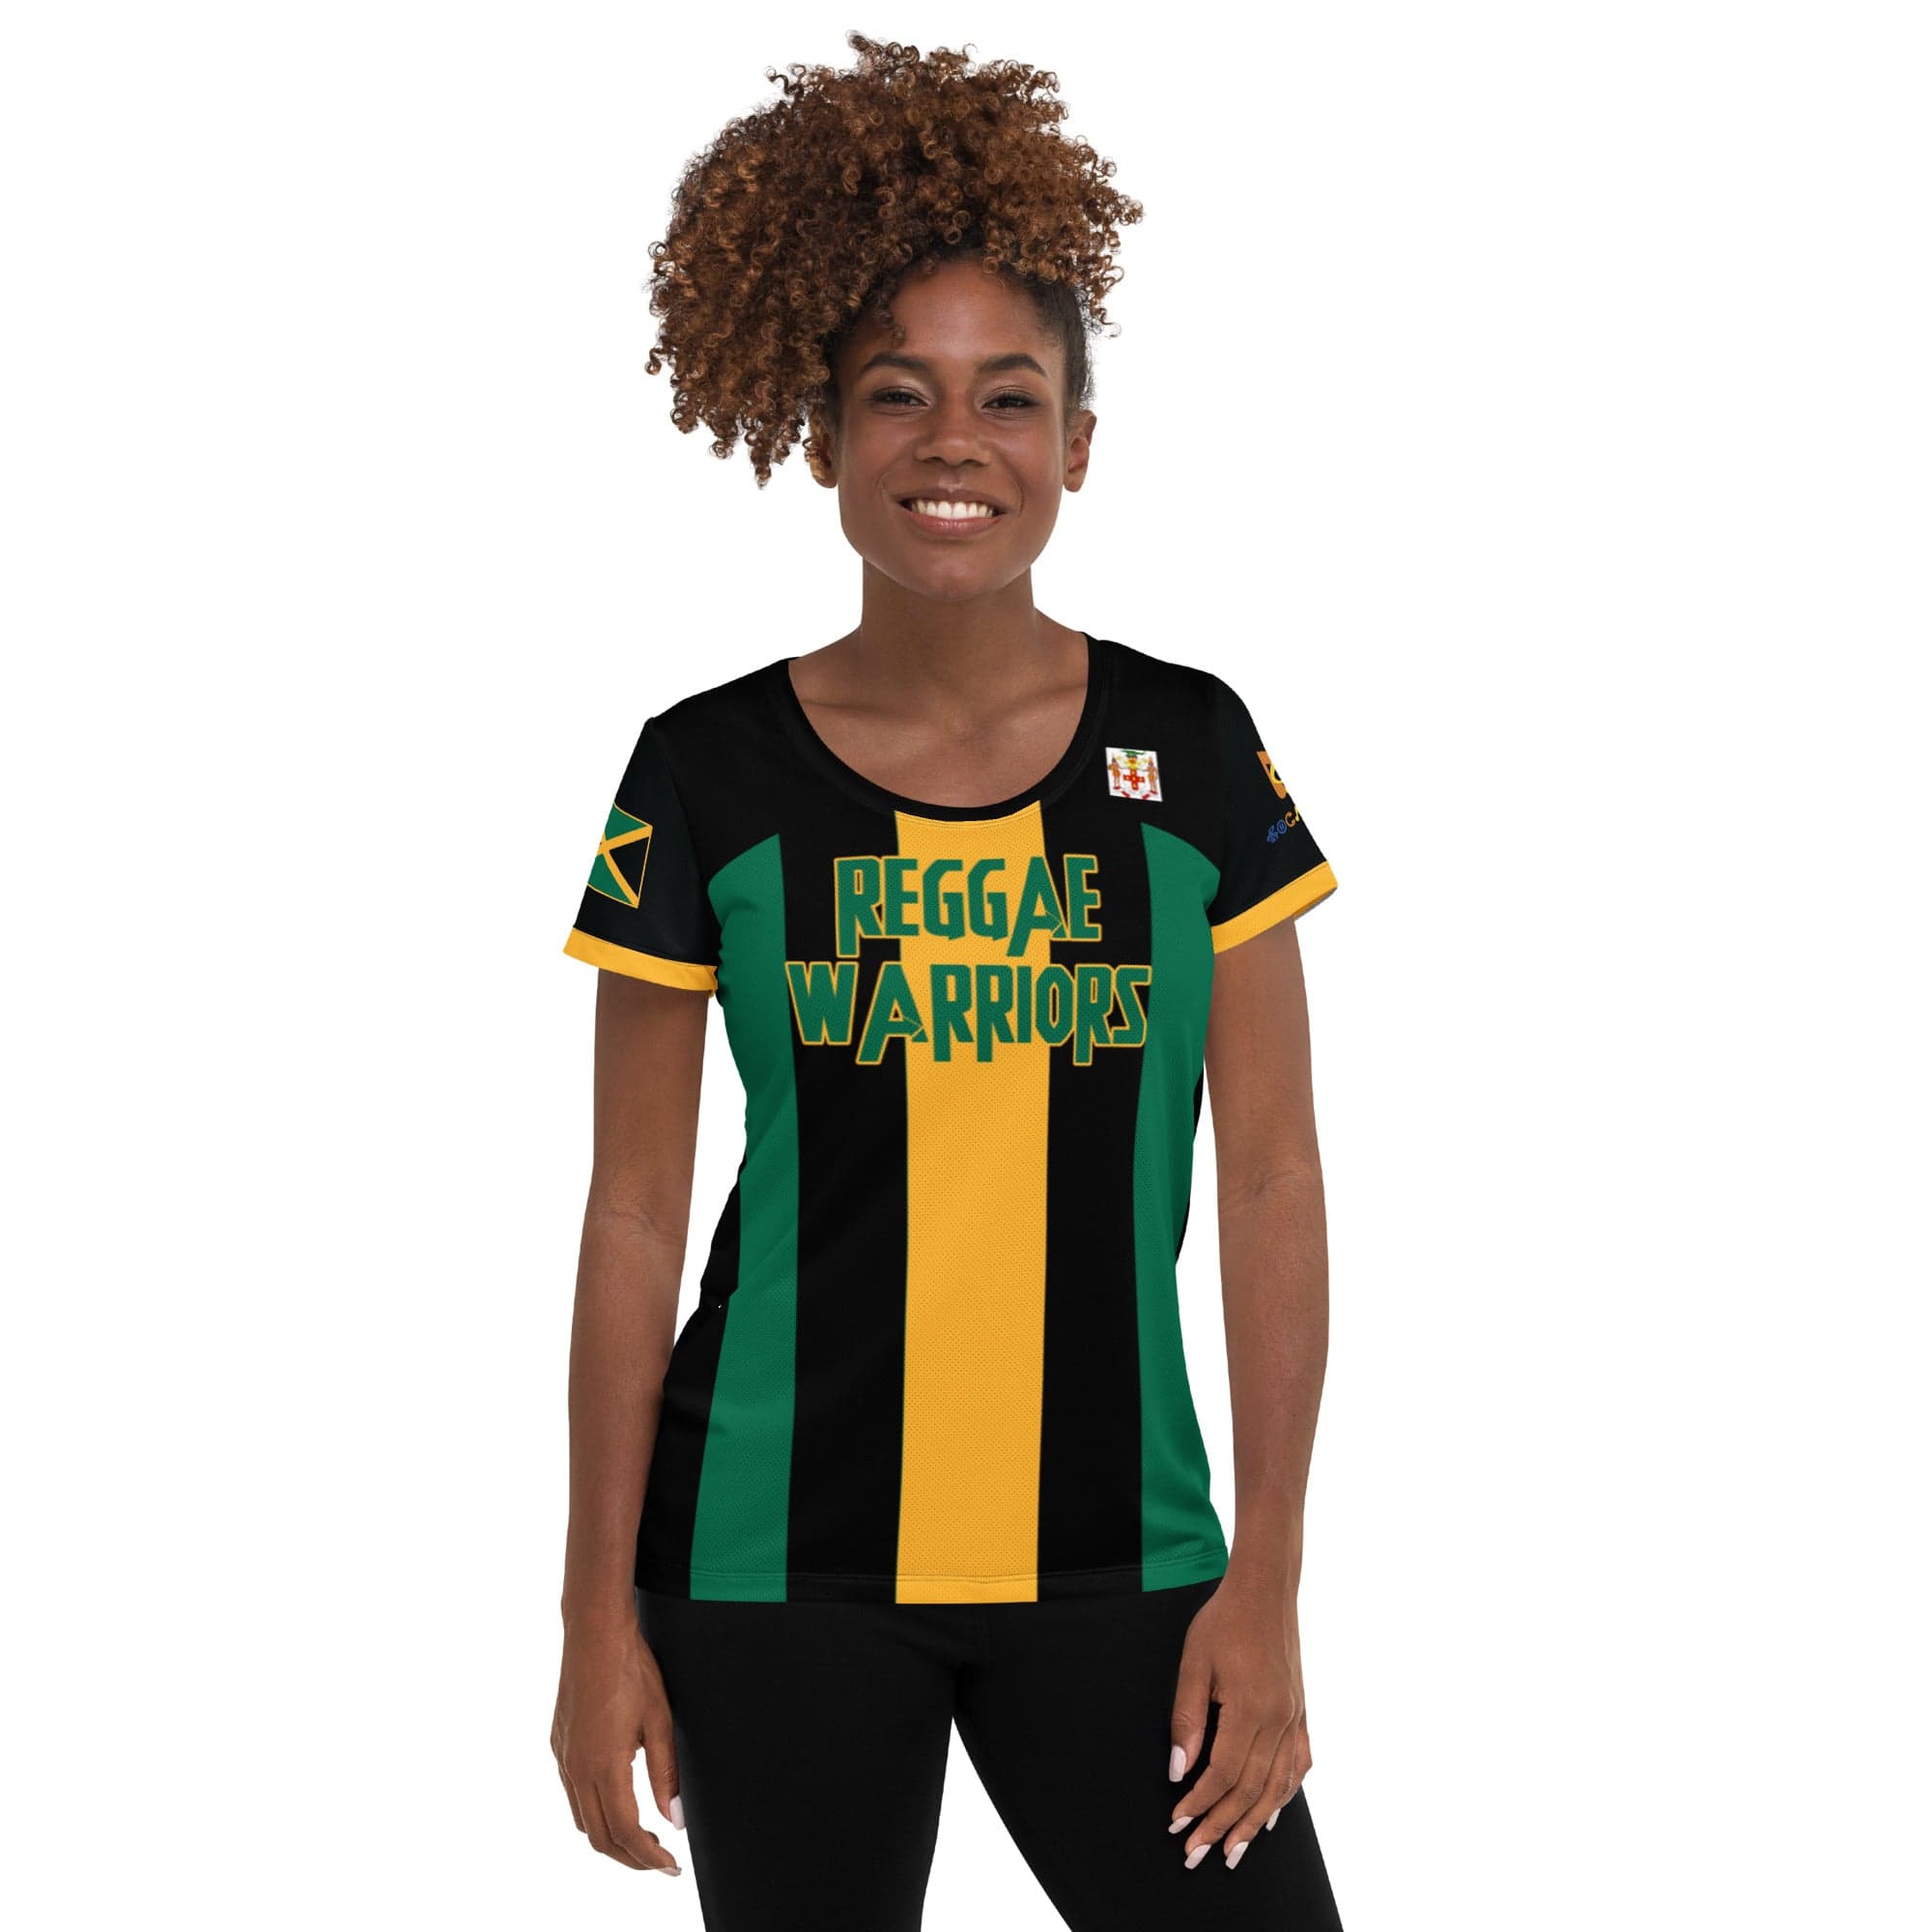 A Jamaica football women's shirt in Jamaica flag colors of green, black and yellow showing the front of a black woman.